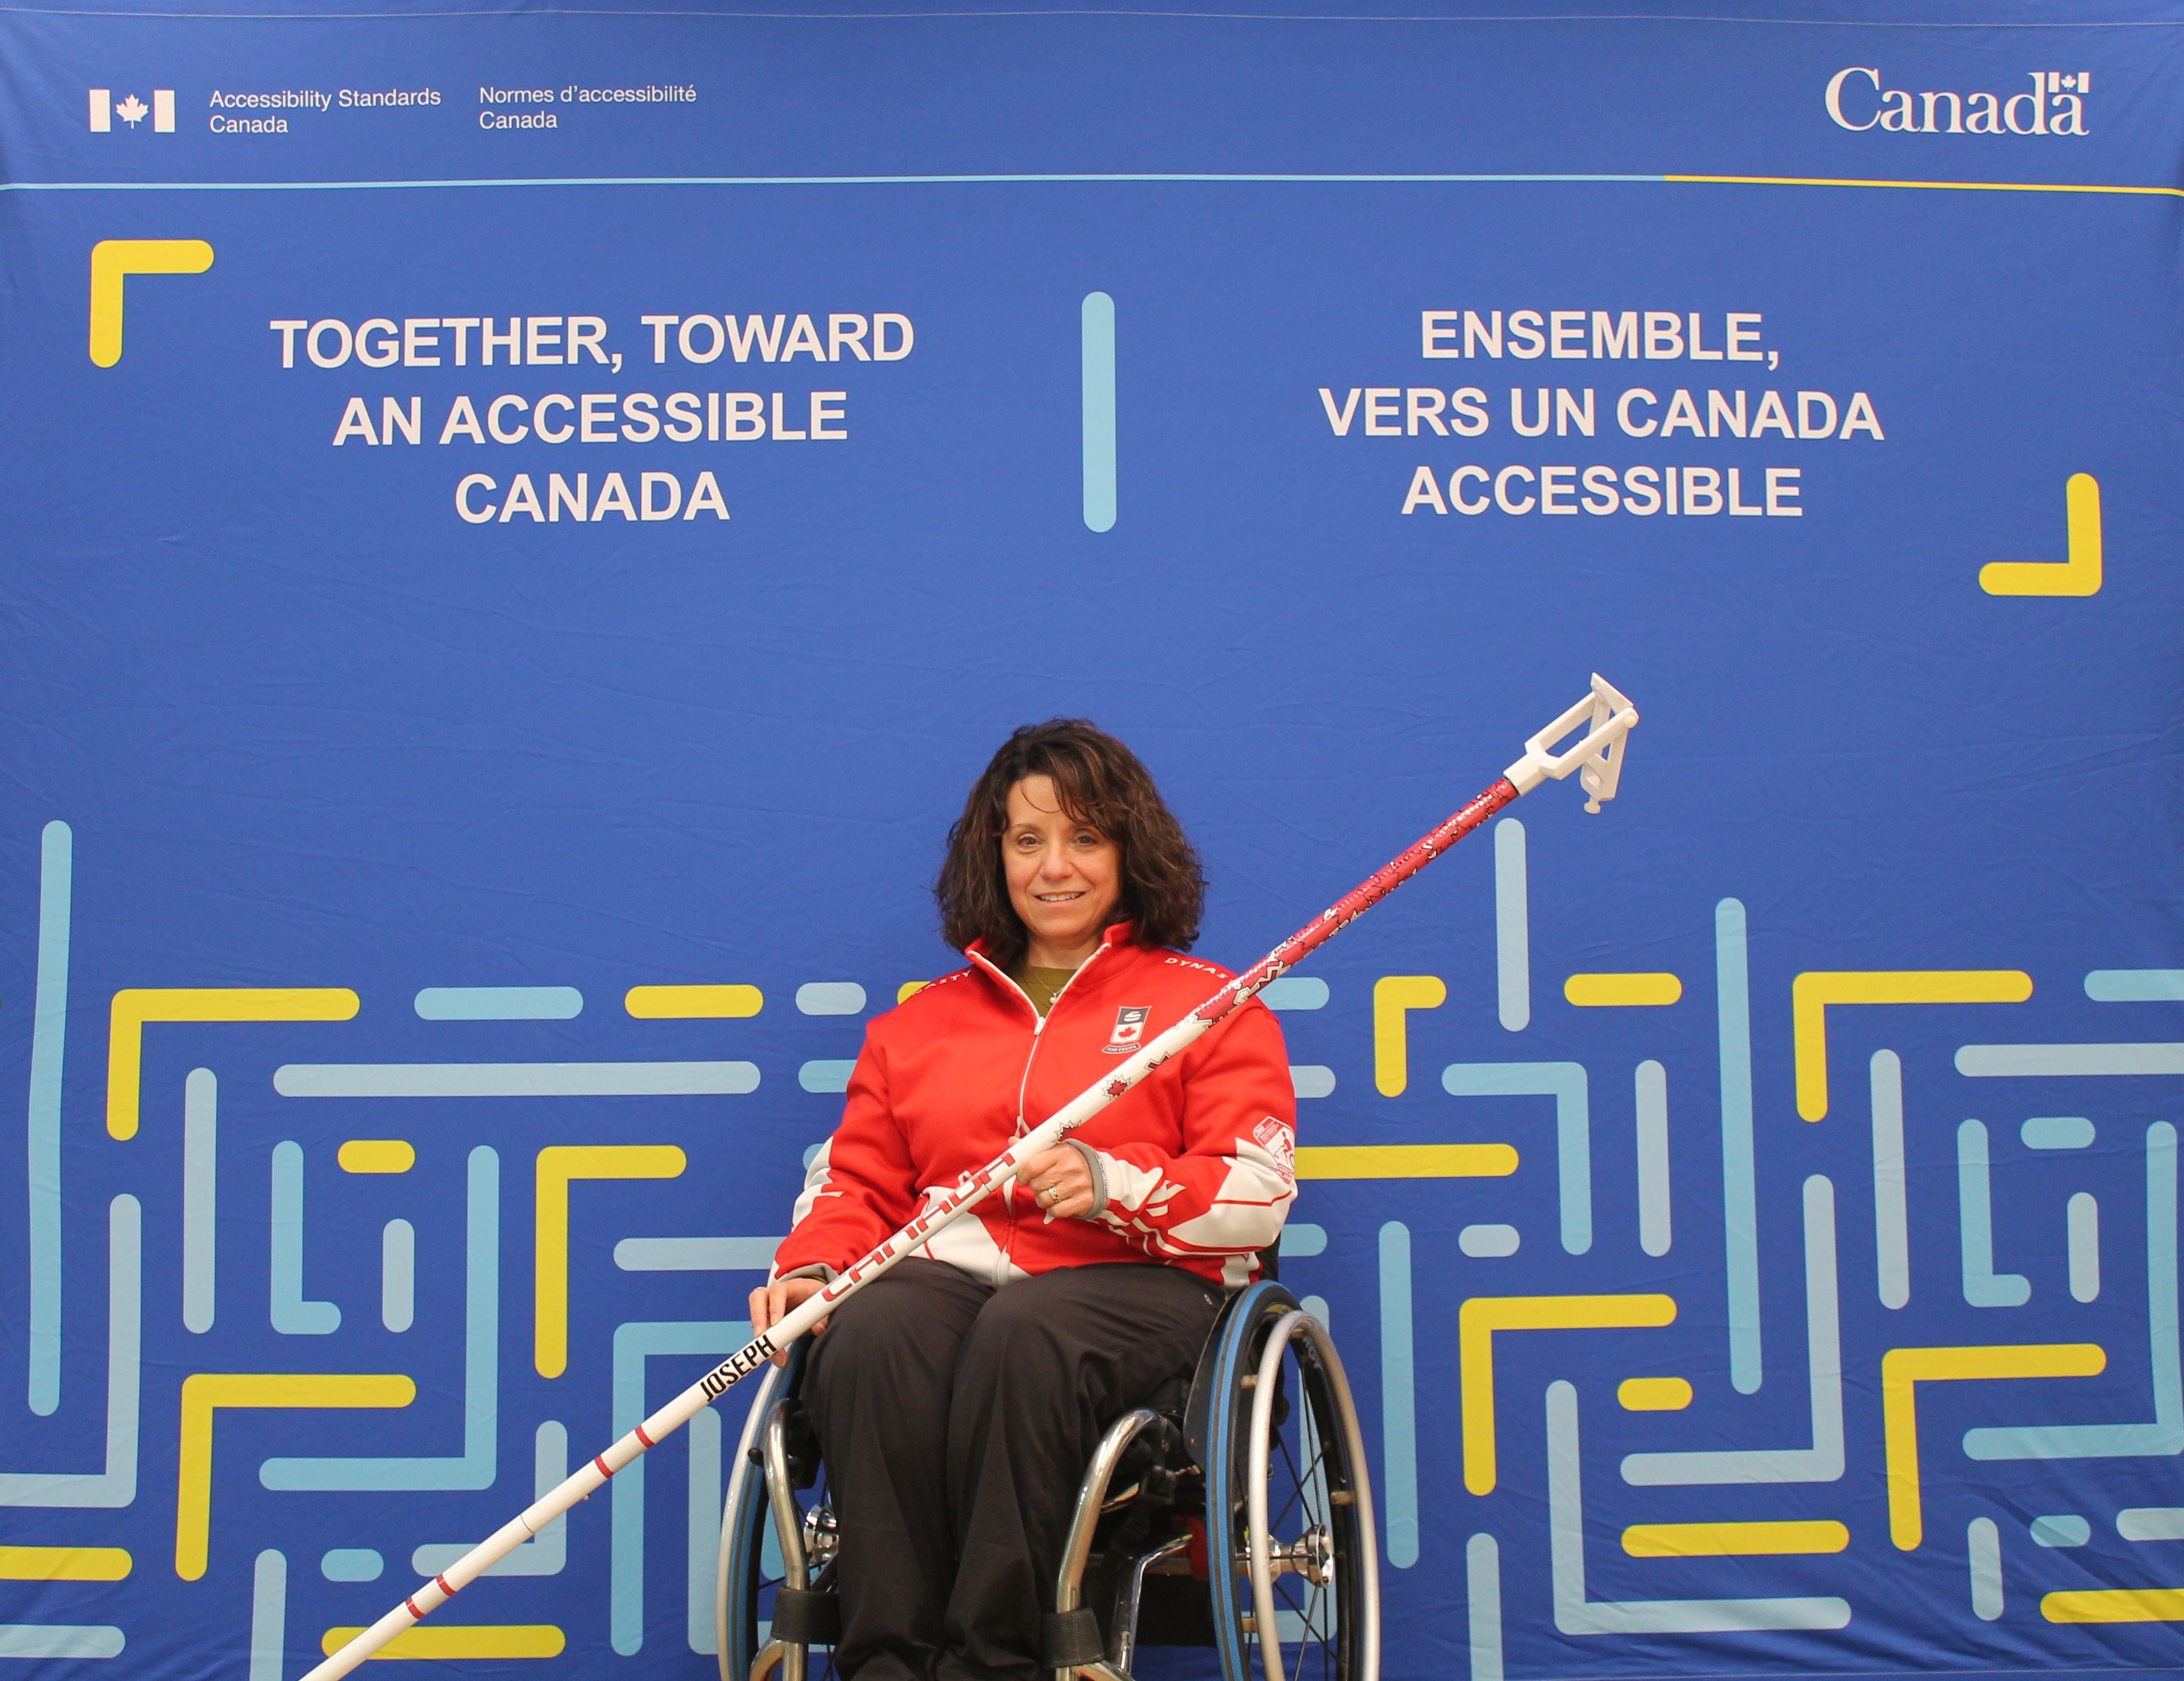 Collinda Joseph poses with her wheelchair and her curling stick. The stick has an adjustable handle at the end that grips the stone and allows her to throw it from a distance. She is in front of a blue backdrop with Accessibility Standards Canada's logo. The English slogan on it reads "Together, toward an accessible Canada". The French slogan on it reads "Ensemble vers un Canada Accessible".